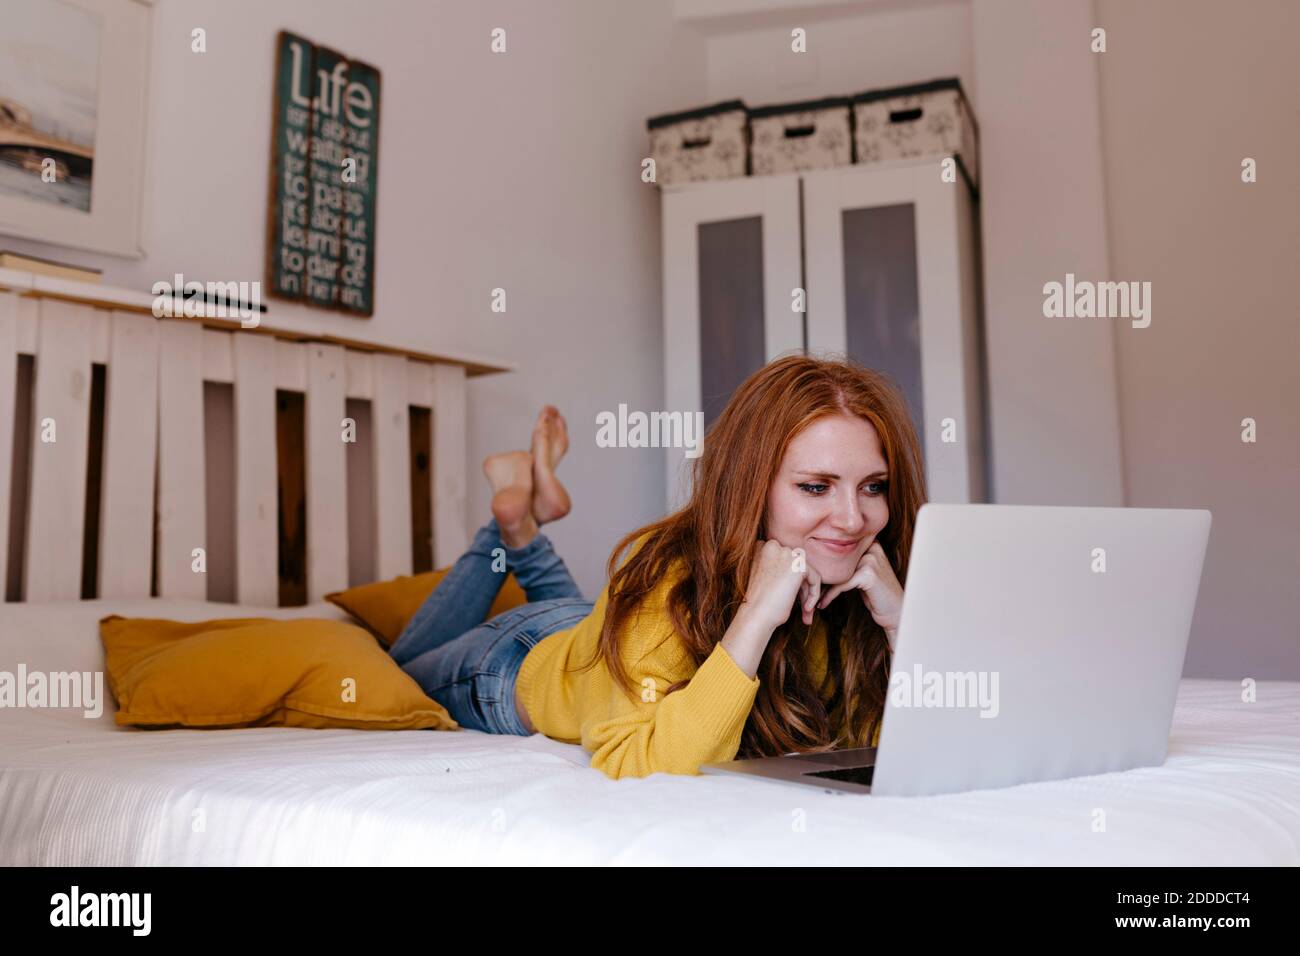 Smiling woman lying on front with hand on chin using laptop at home Stock Photo